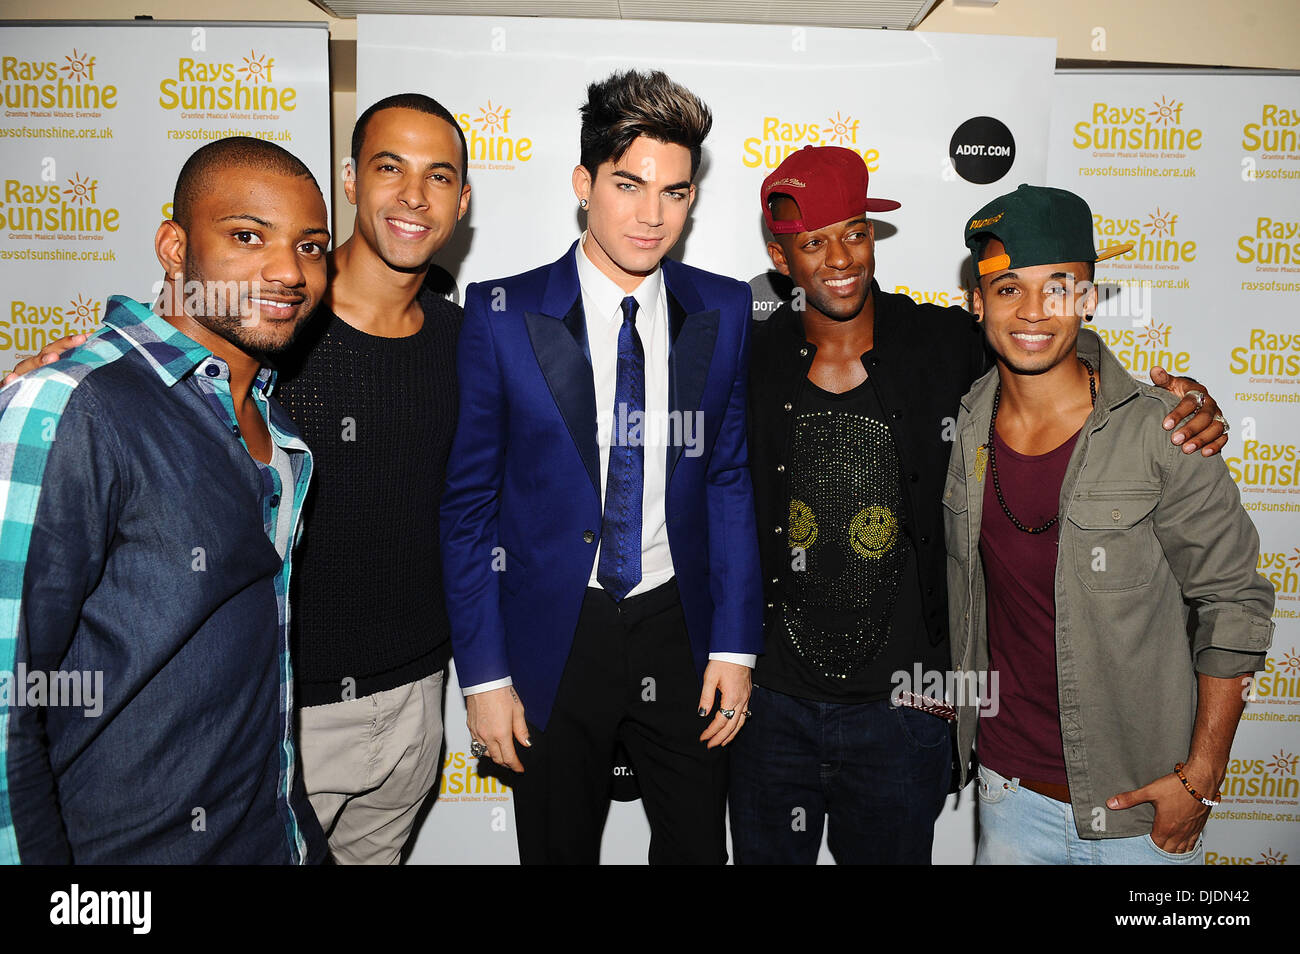 Adam Lambert with Jonathan 'JB' Gill, Marvin Humes, Oritse Williams and Aston Merrygold of the band JLS, at the Rays of Sunshine Children’s Charity concert at the Royal Albert Hall. London, England - 07.06.12 Stock Photo